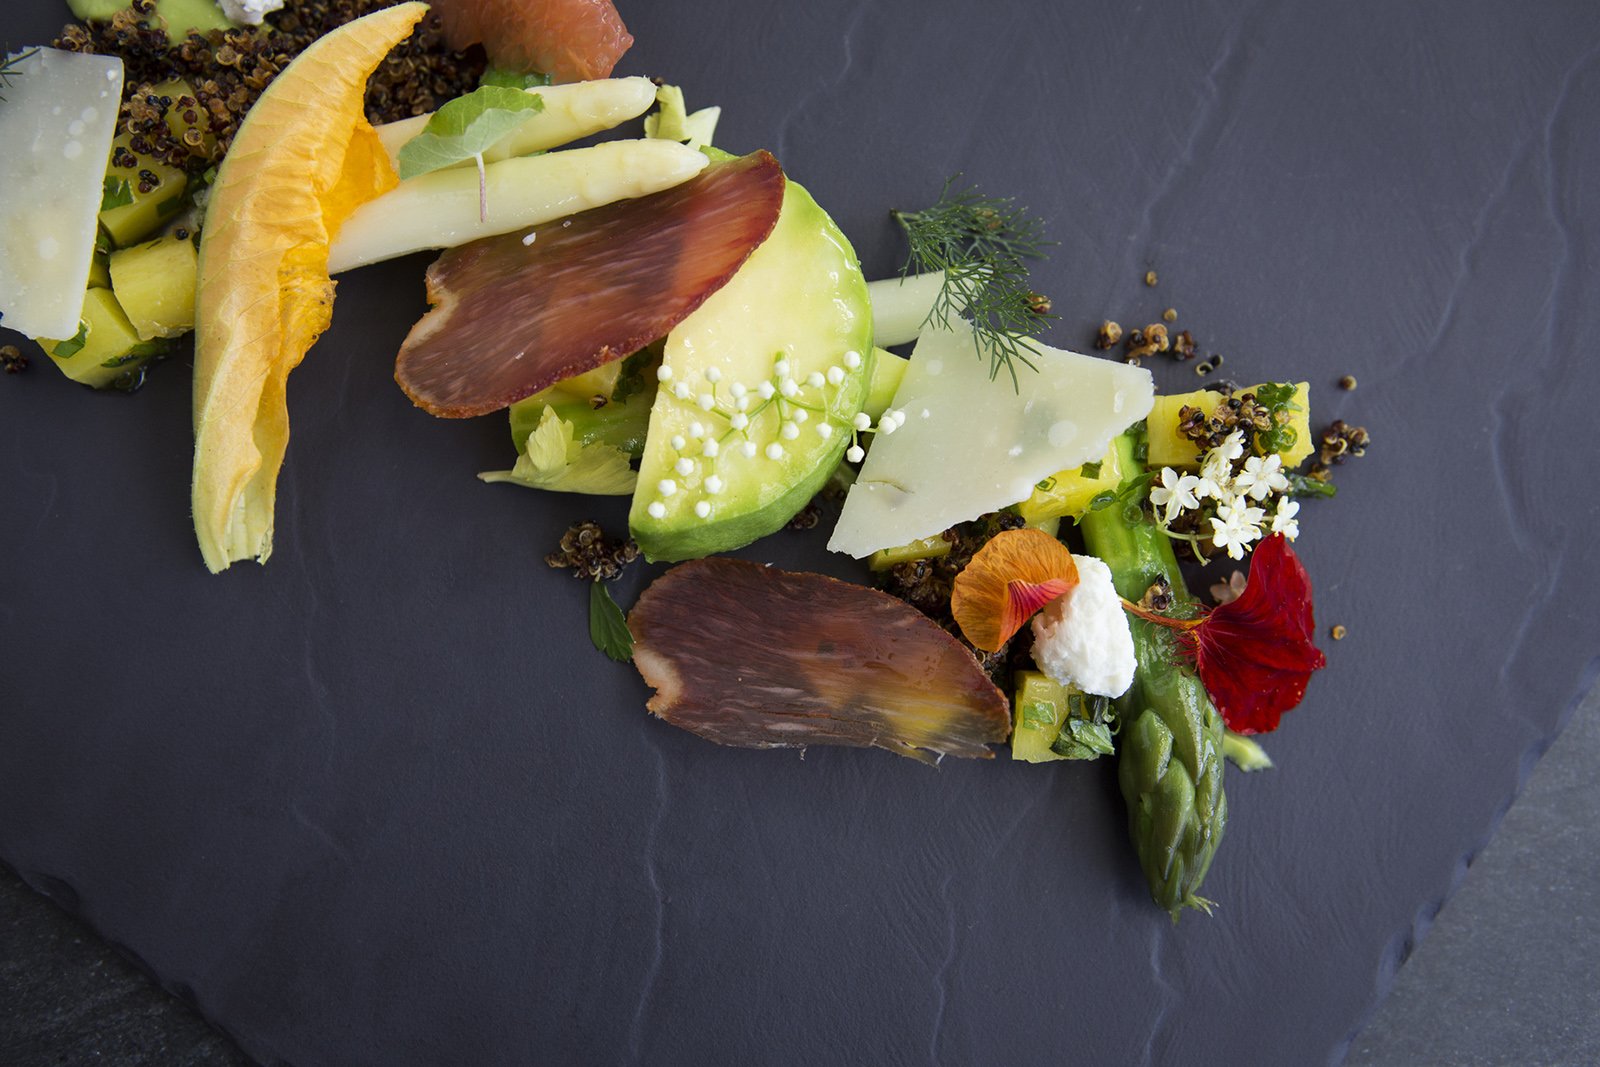 Creative display of vegetables on a plate.